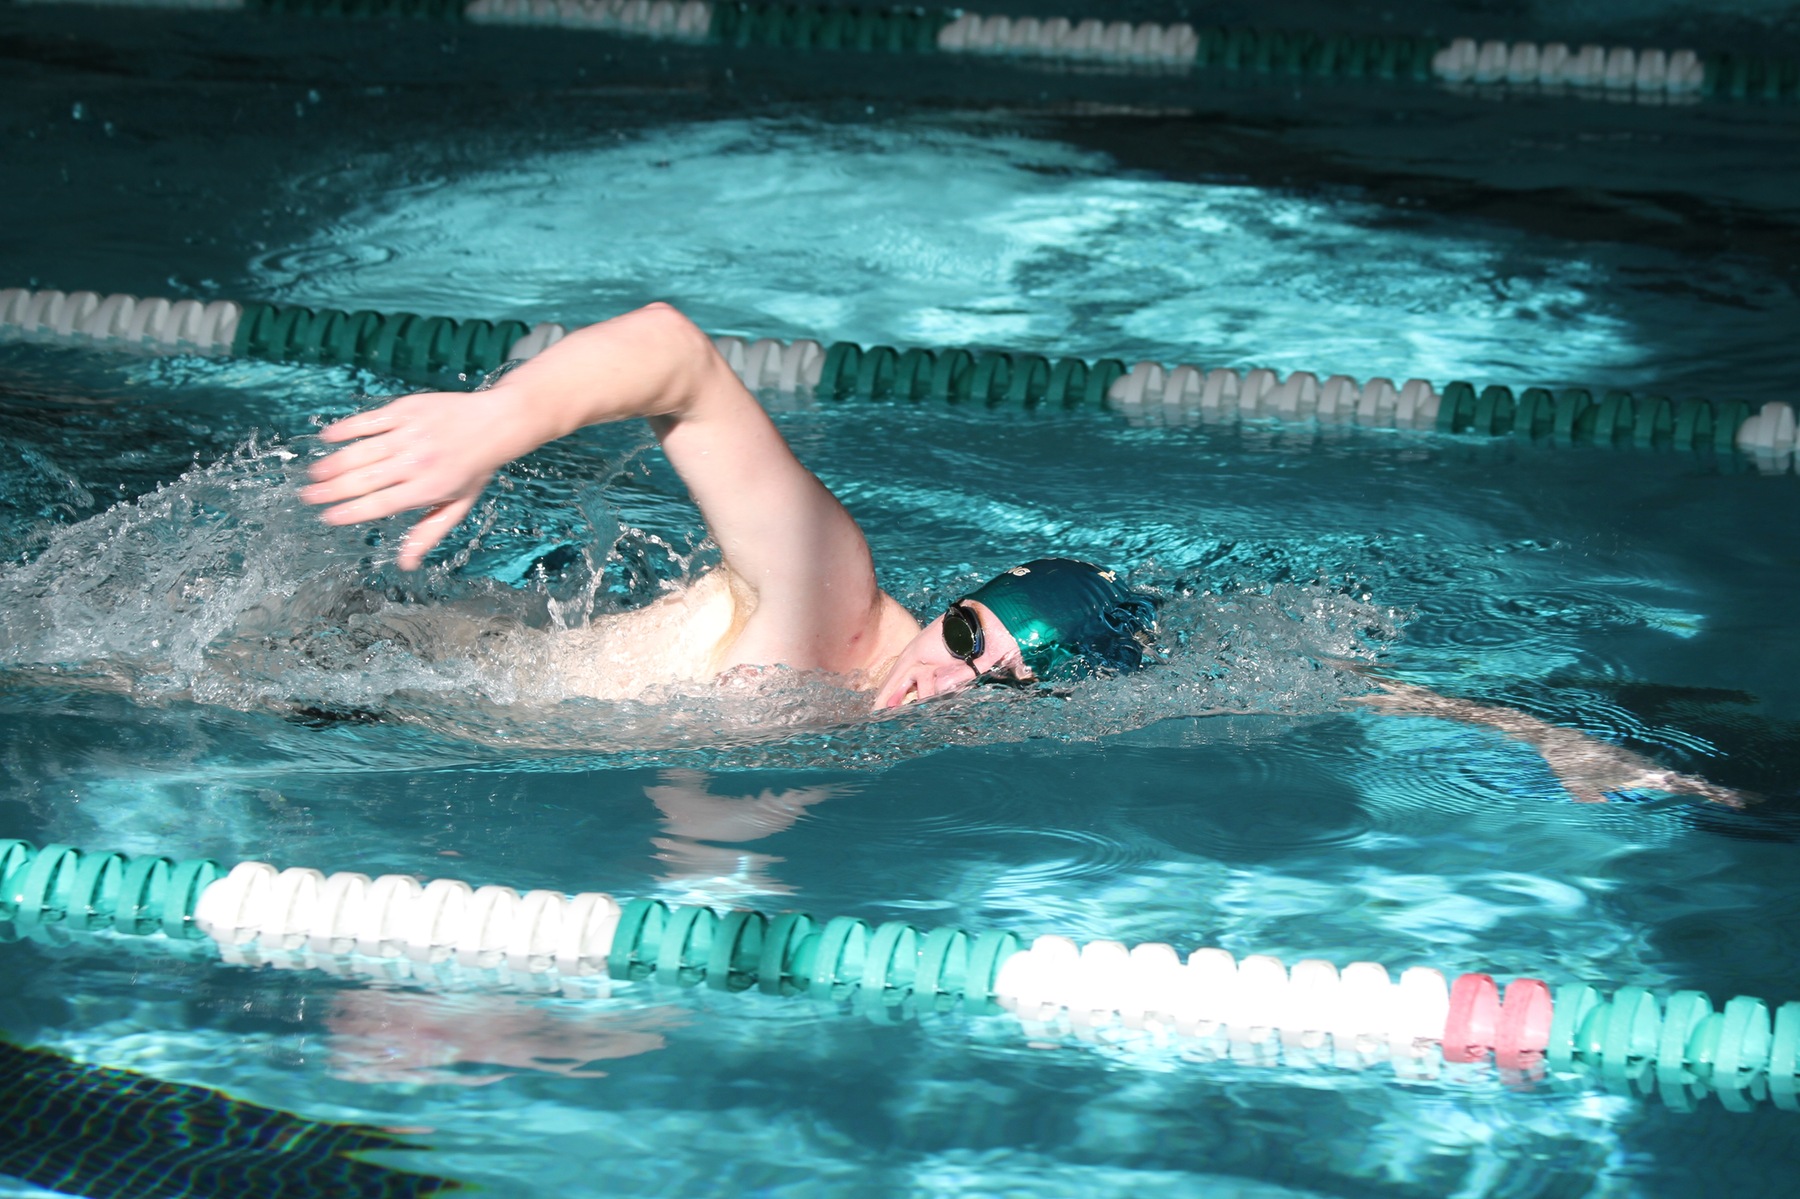 Blazer Swimming Participates In Hour Of Power For 10th Time